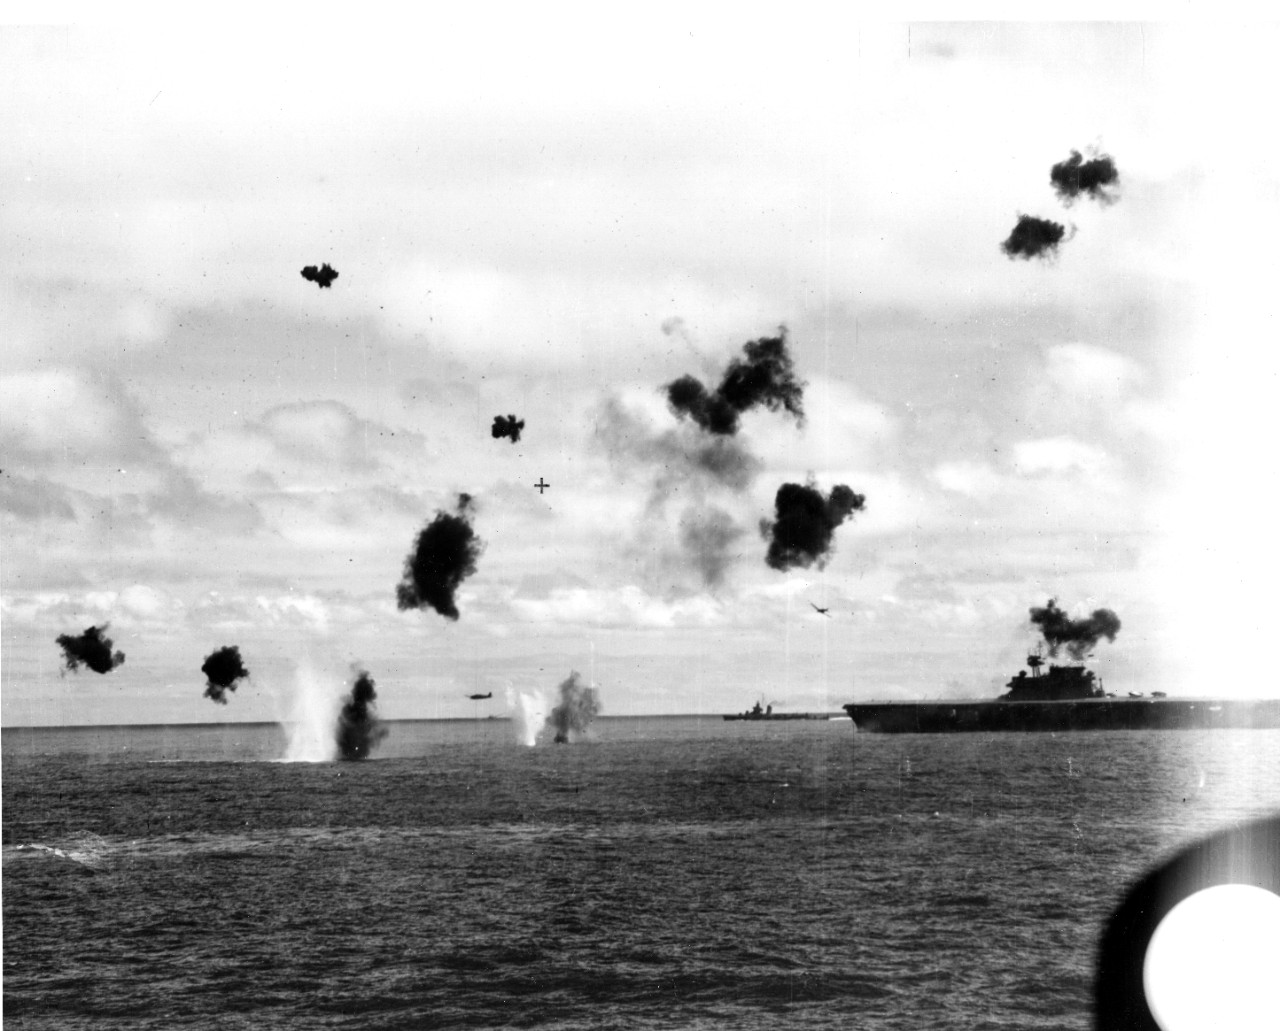 Photo #: 80-G-32242  Battle of Midway, June 1942